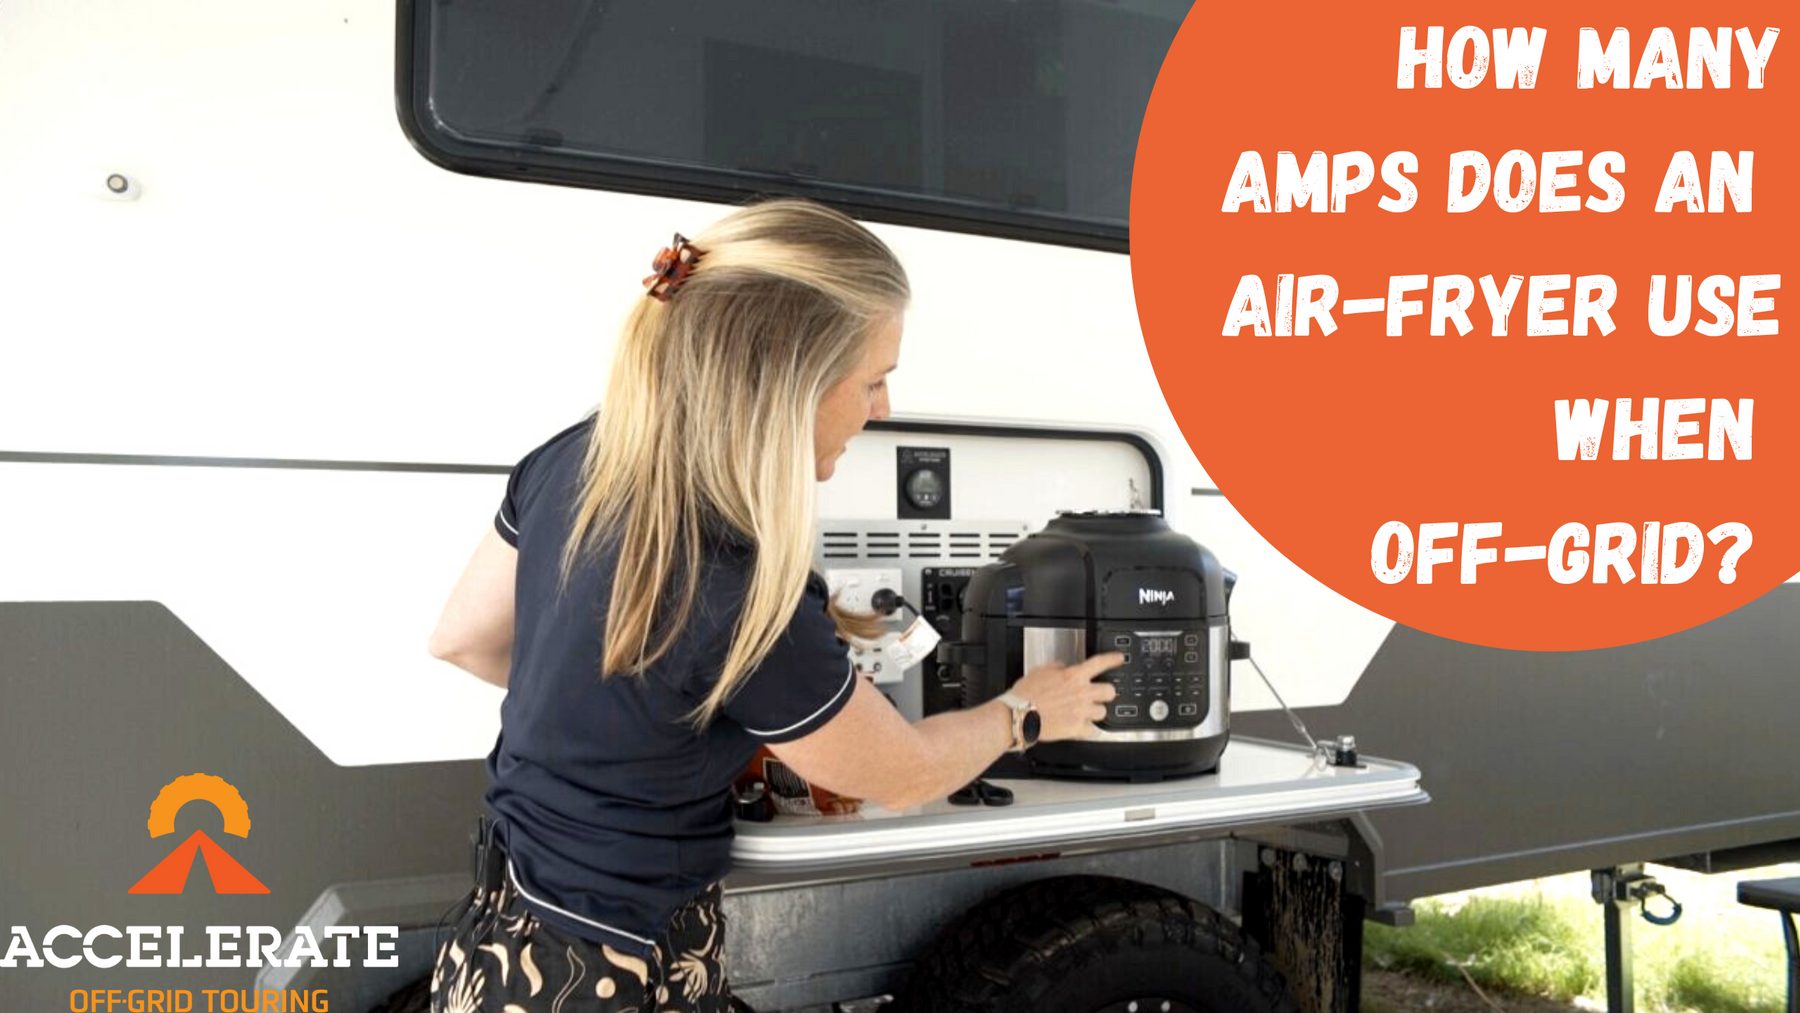 How many amps does an airfryer use when off grid?